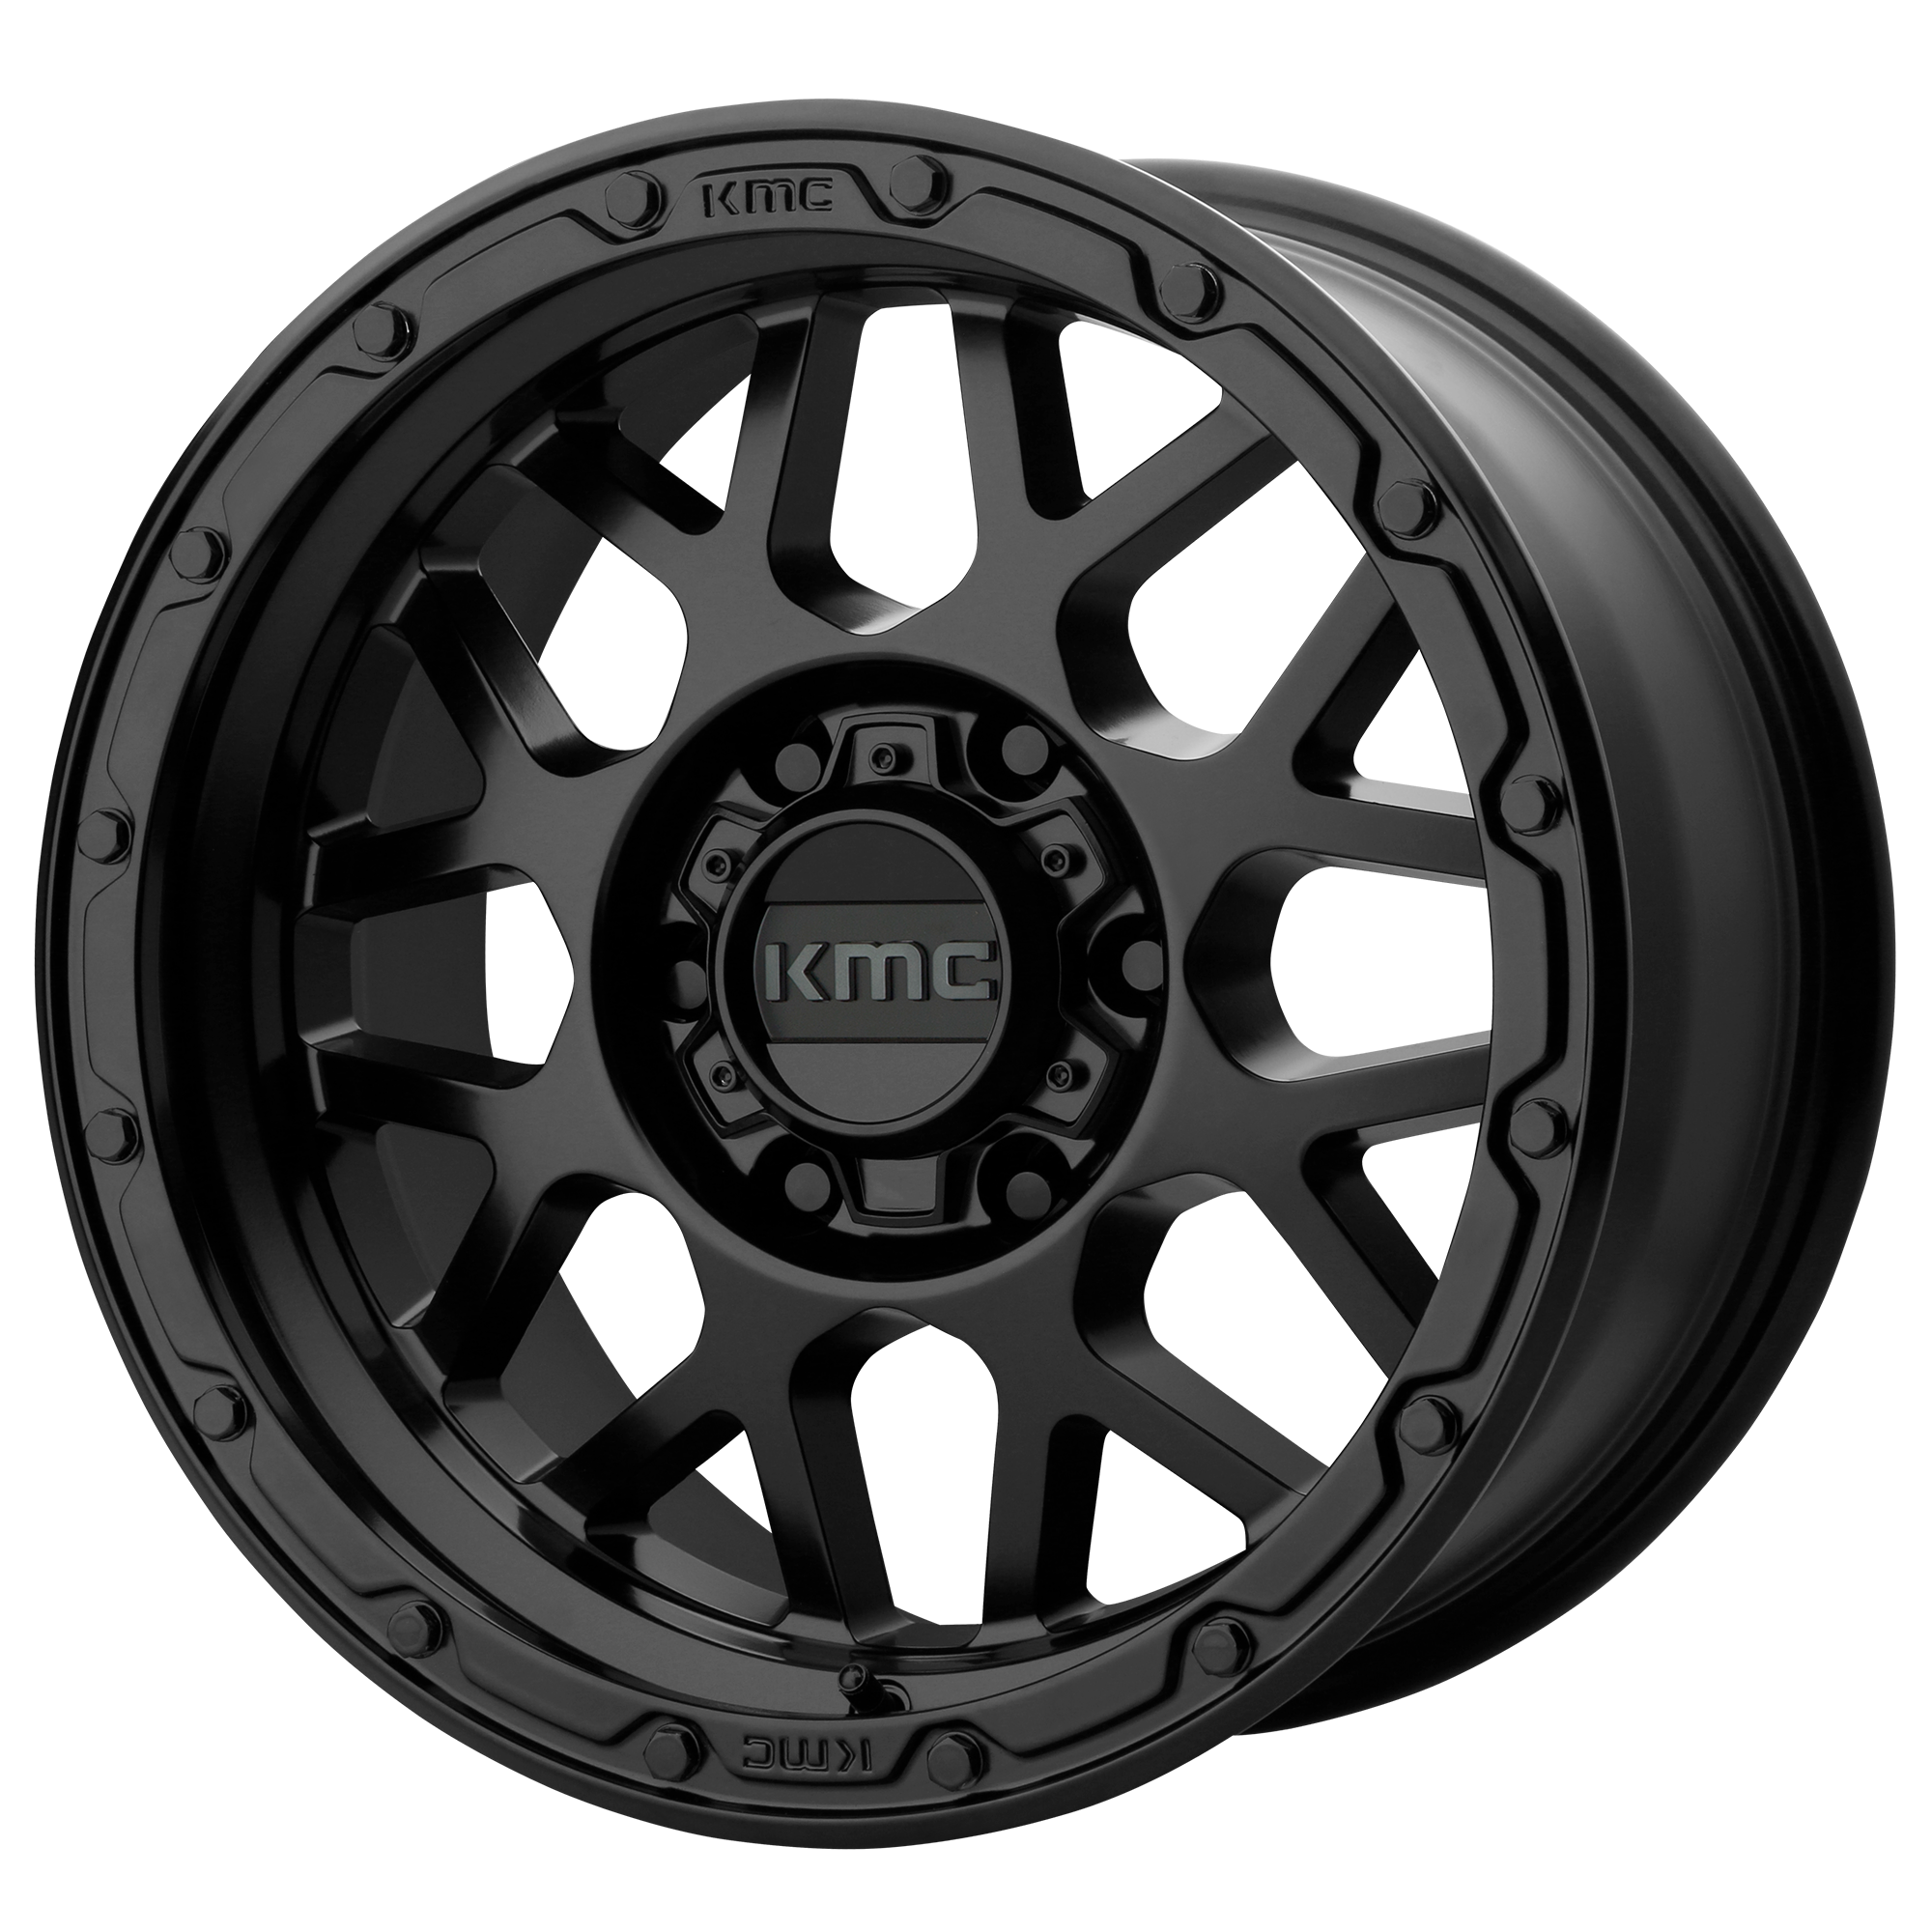 GRENADE OFF-ROAD 20x9 6x114.30 MATTE BLACK (18 mm) - Tires and Engine Performance